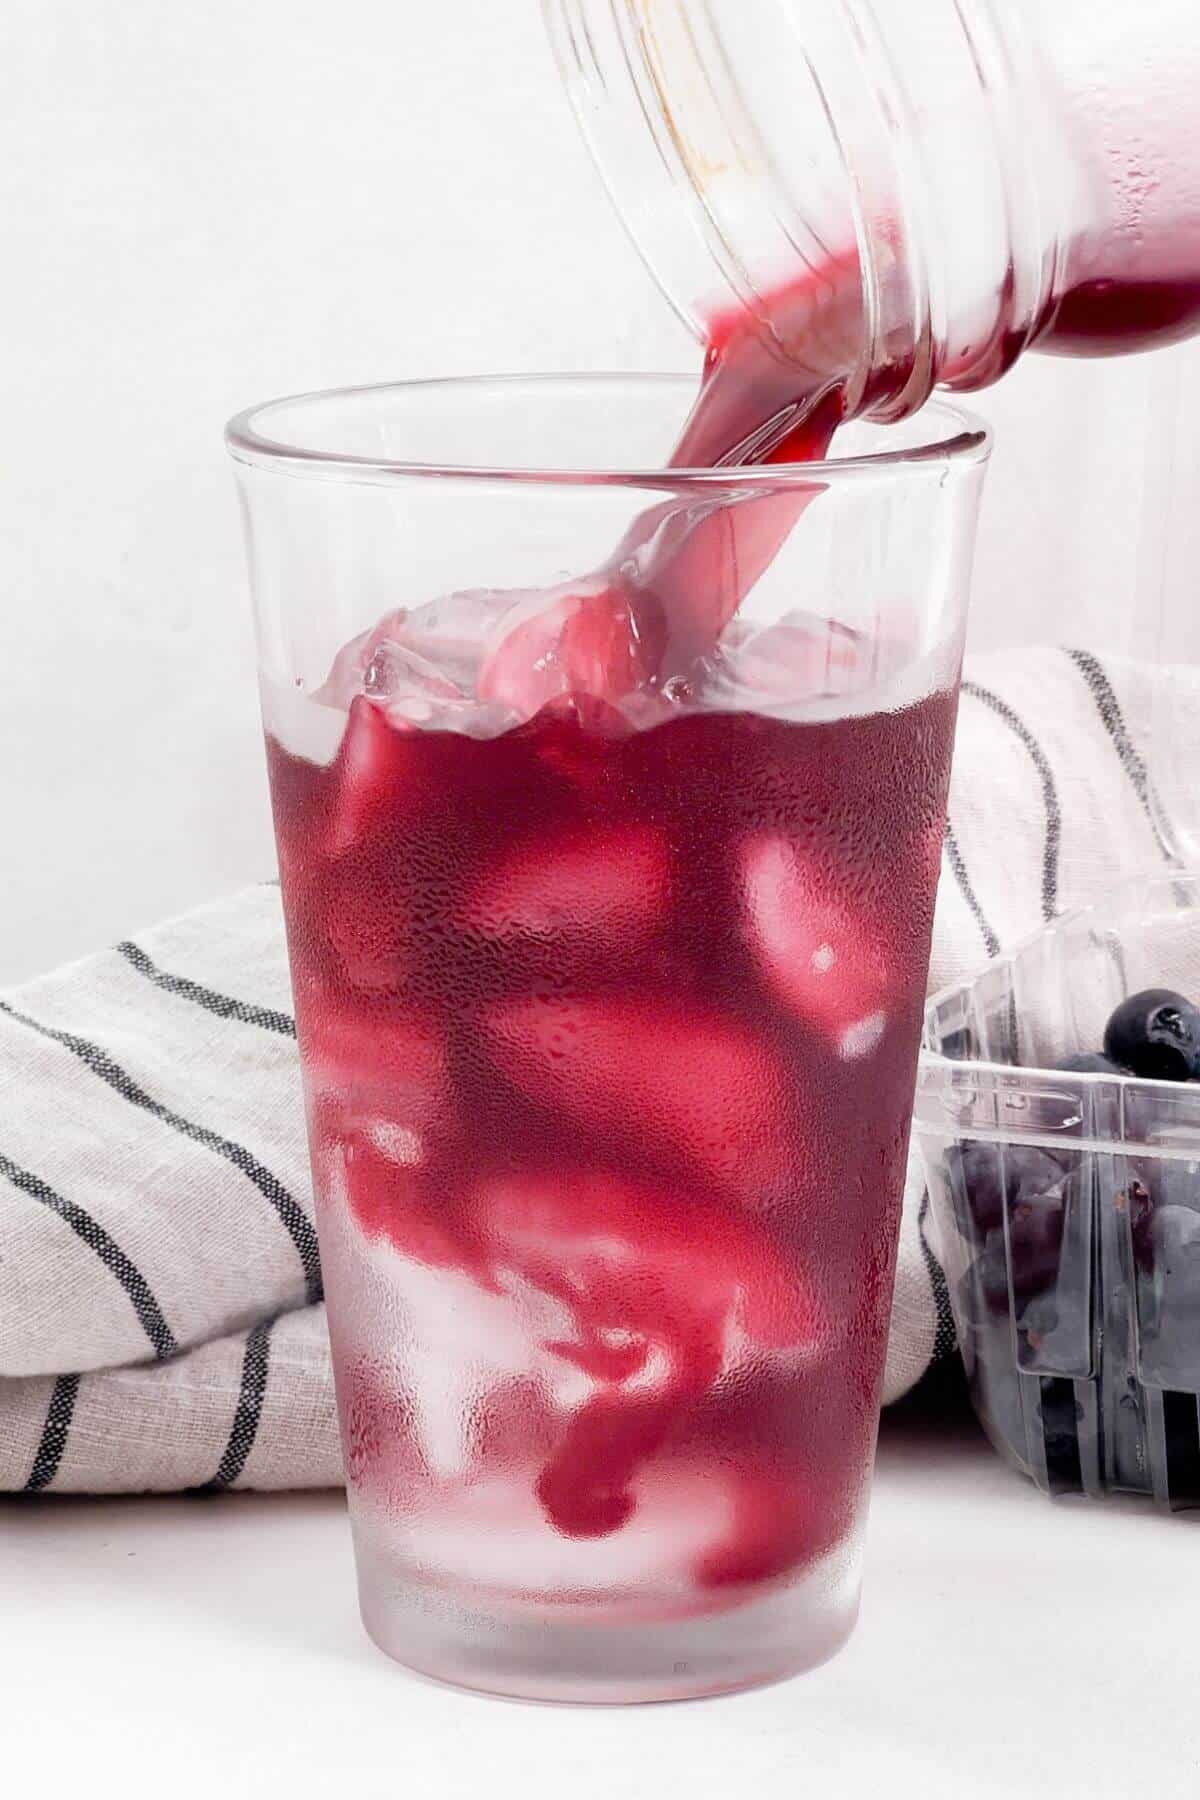 Pouring blueberry lemonade mixture into glass with ice.